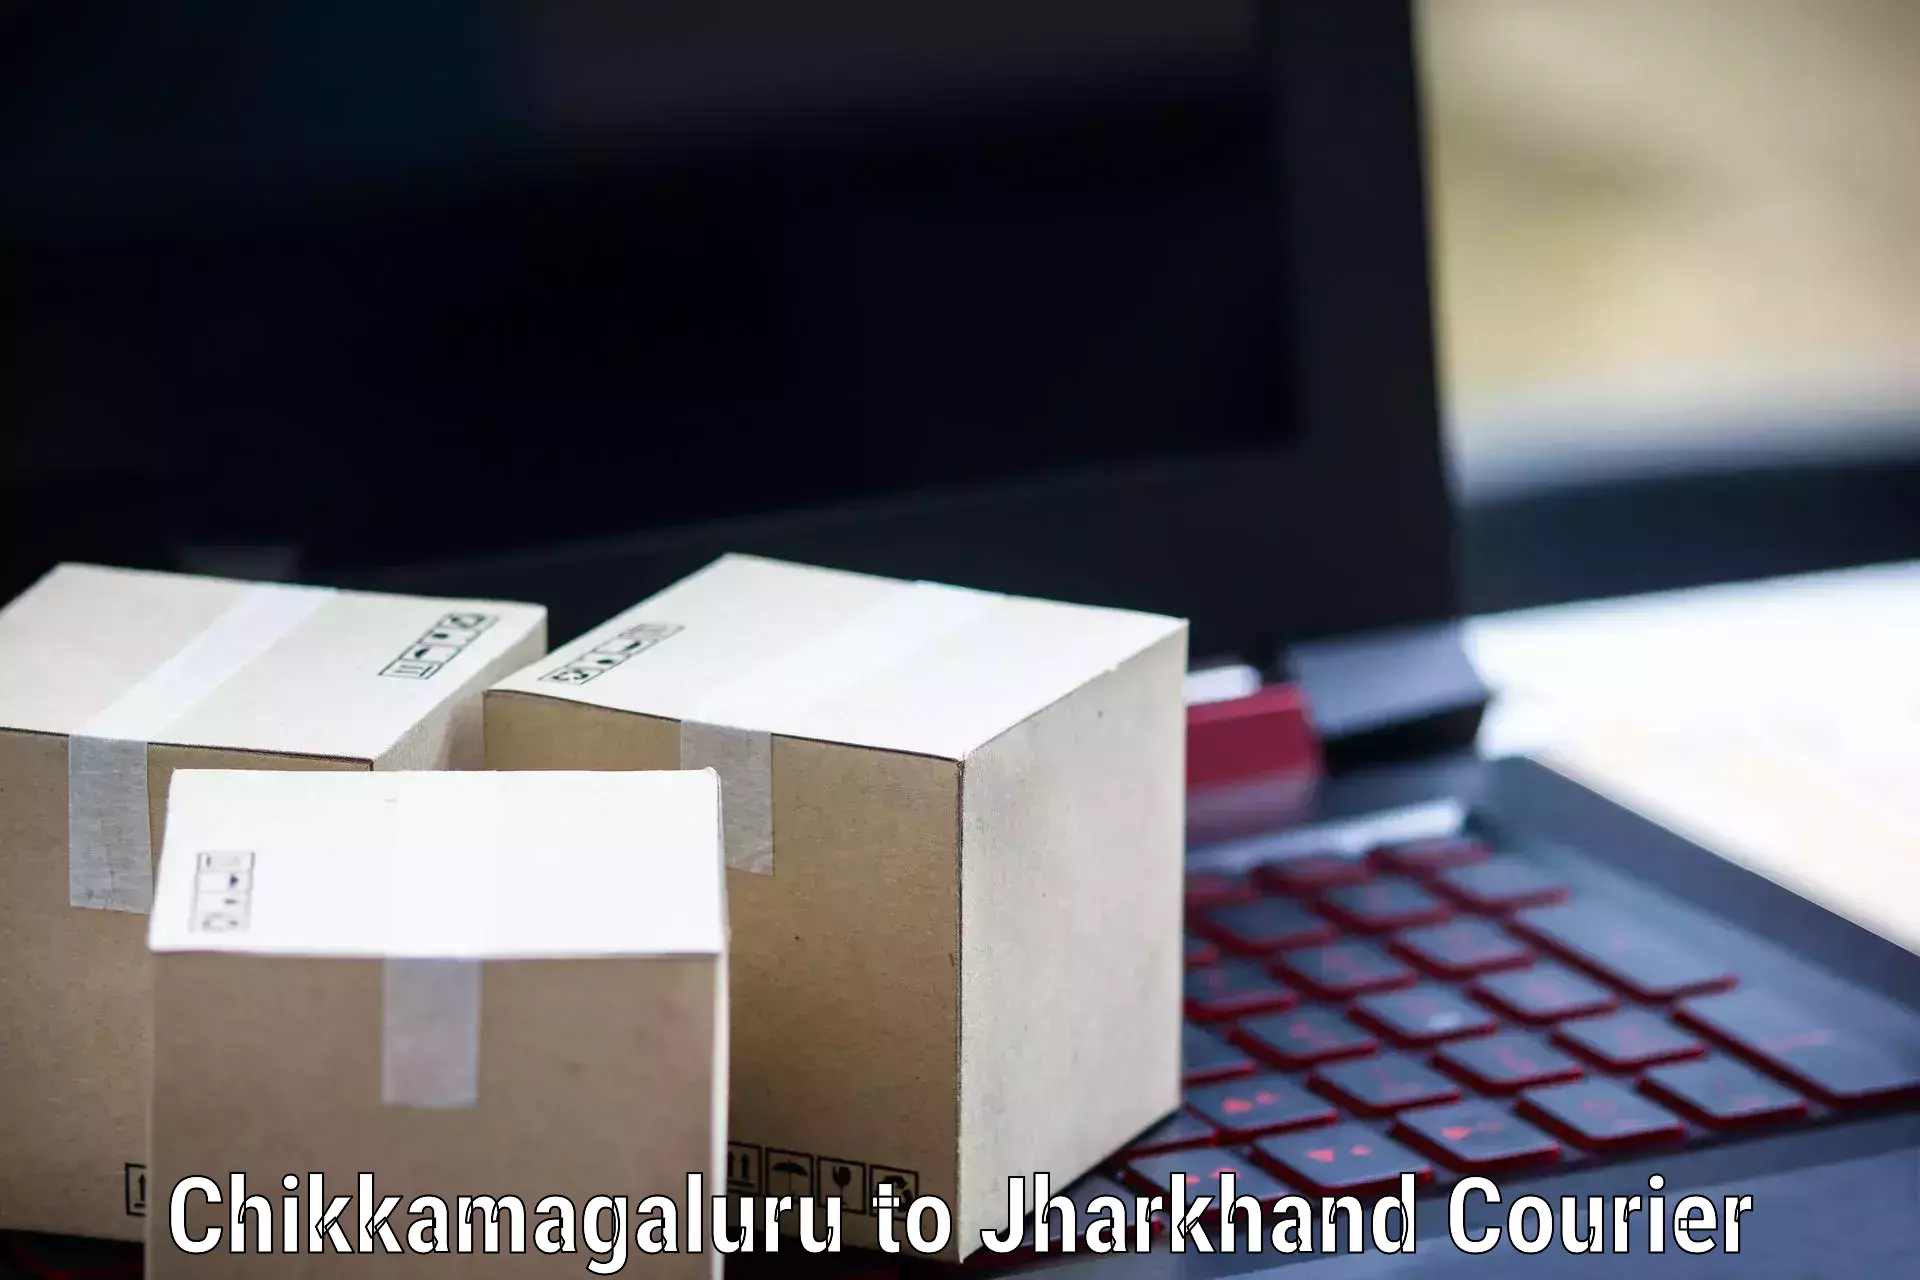 Custom courier packages Chikkamagaluru to Chatra